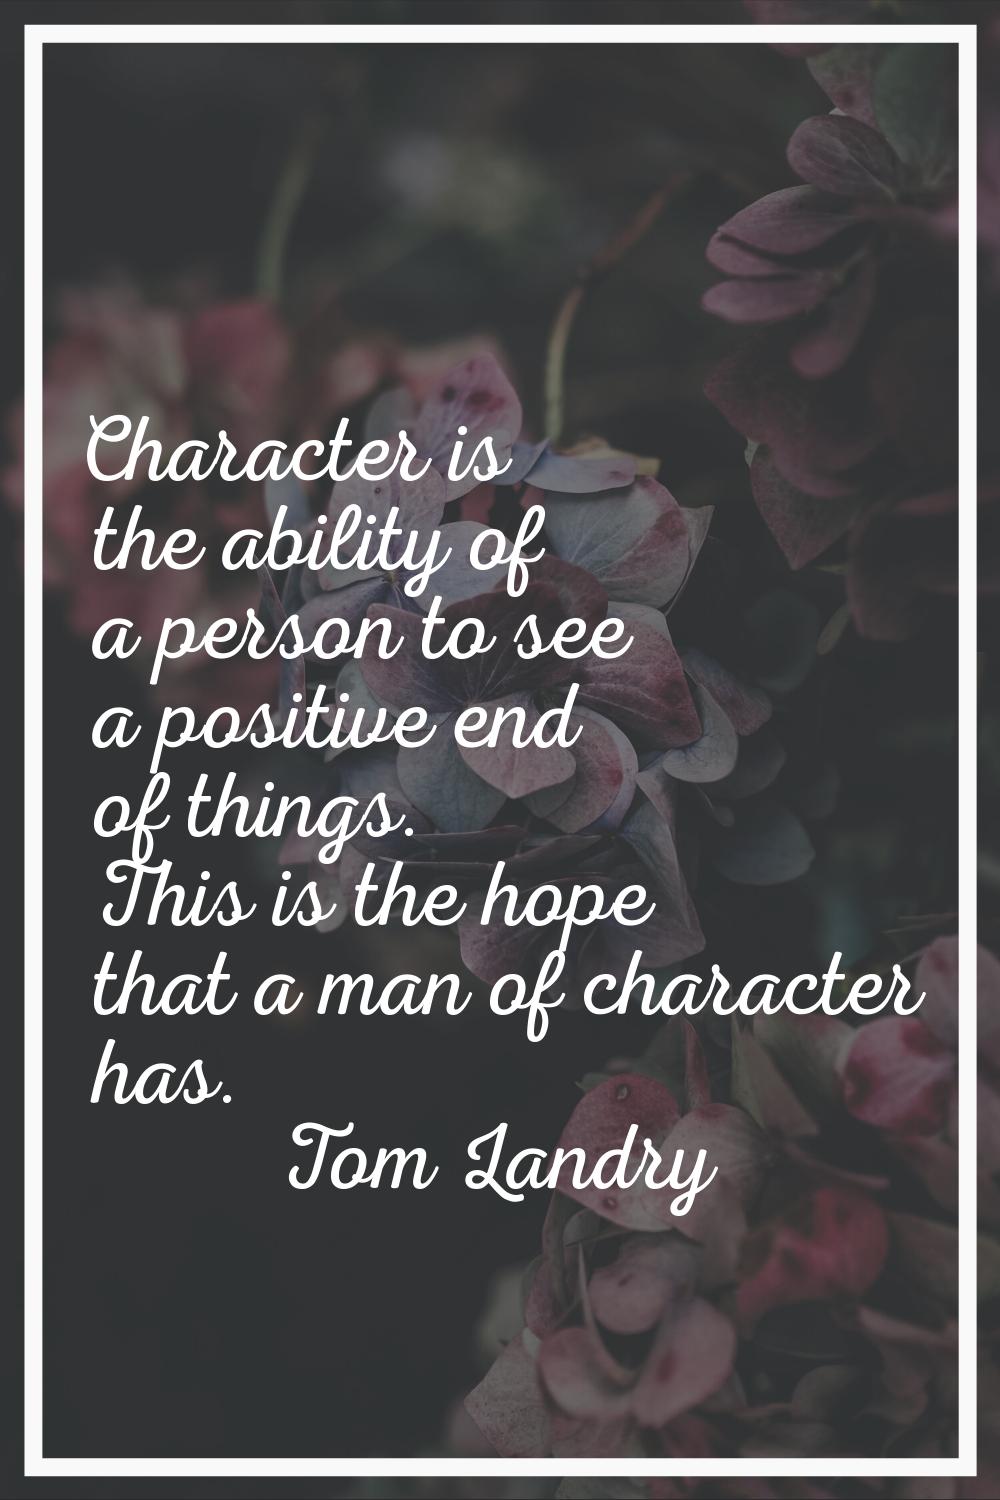 Character is the ability of a person to see a positive end of things. This is the hope that a man o